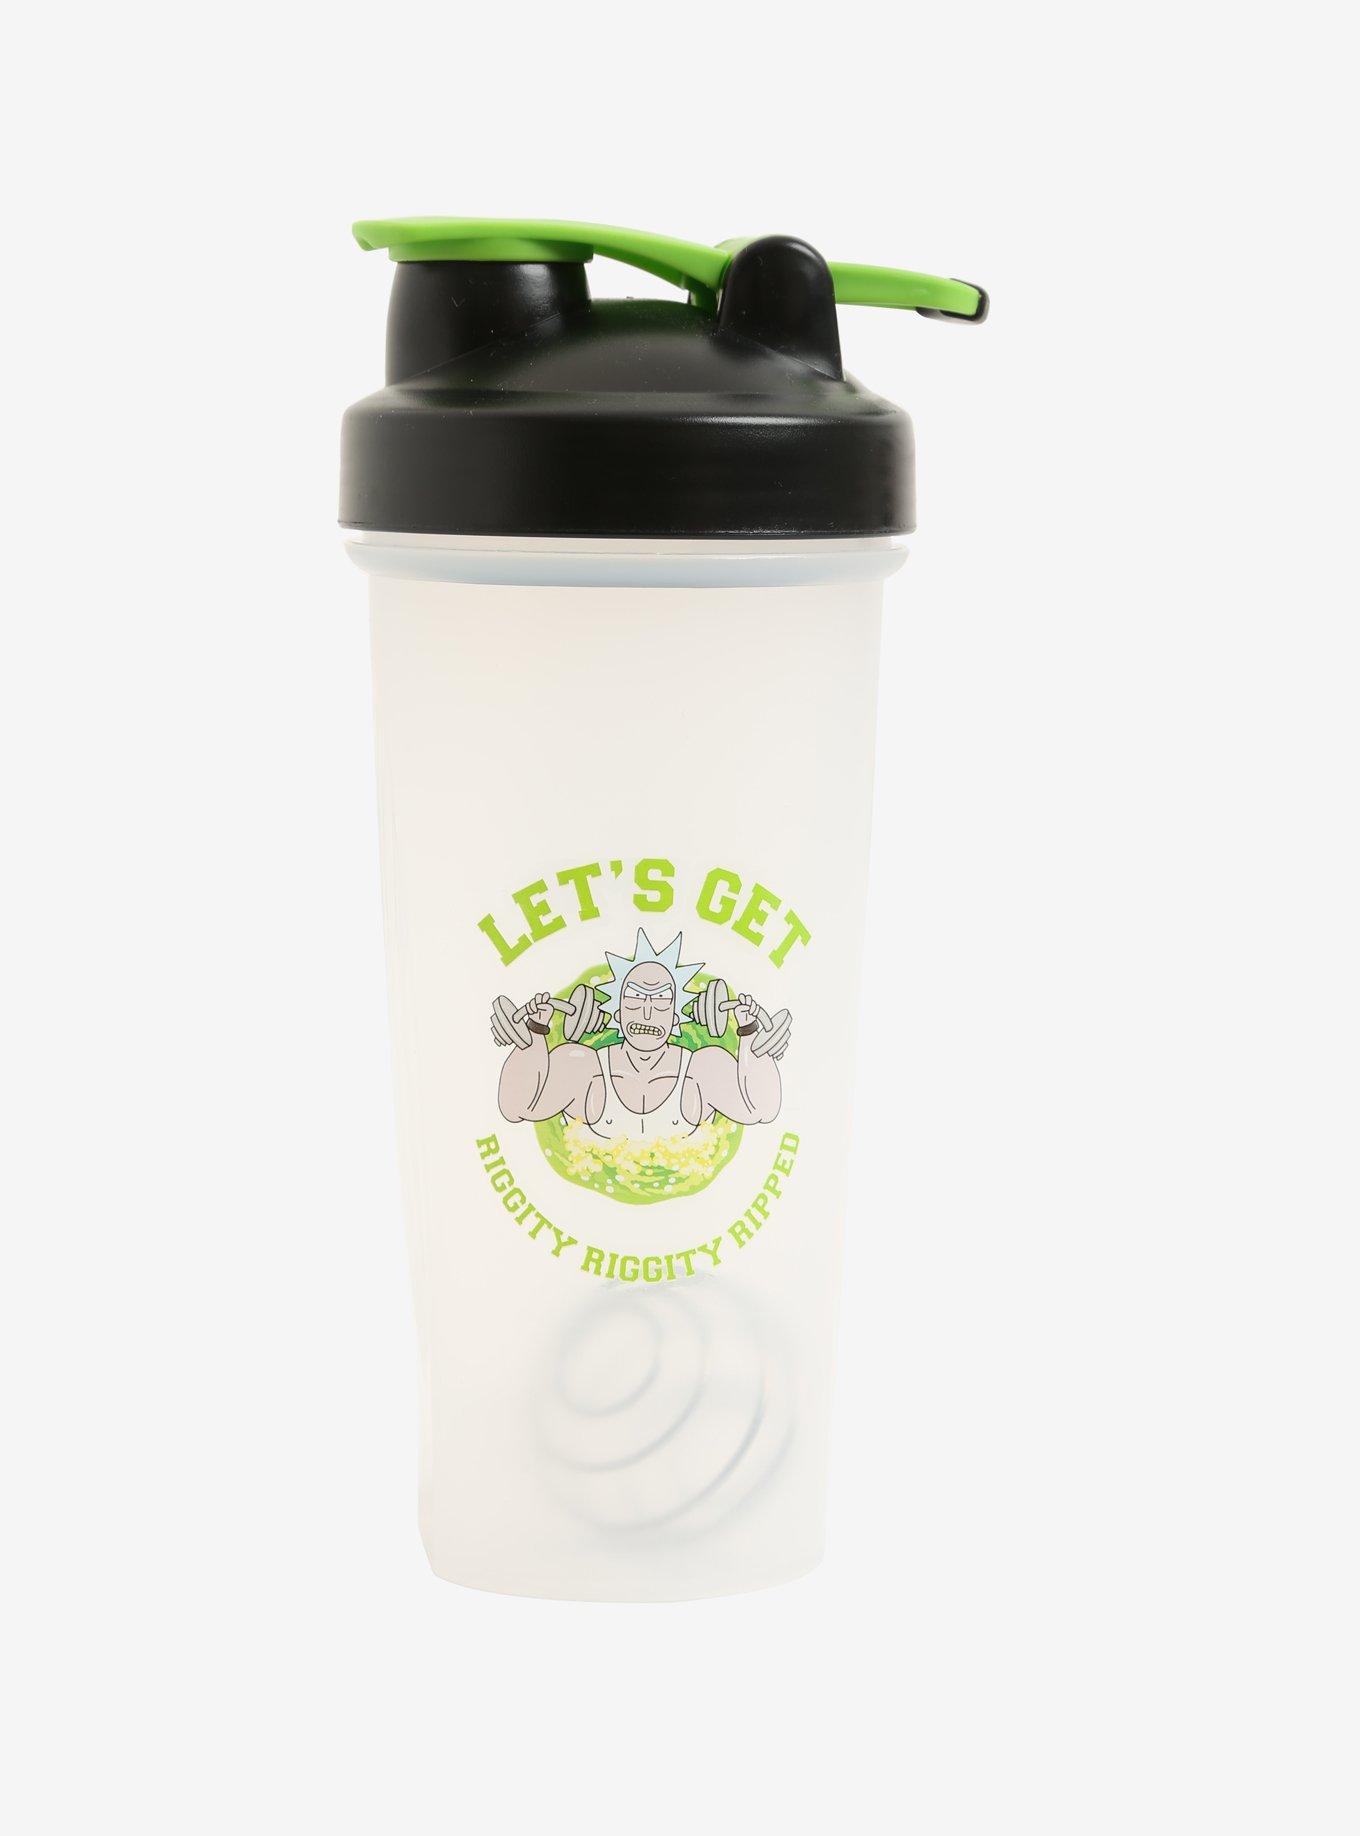 Performa Activ 28 oz. Shaker Mixer Cup - Rick and Morty